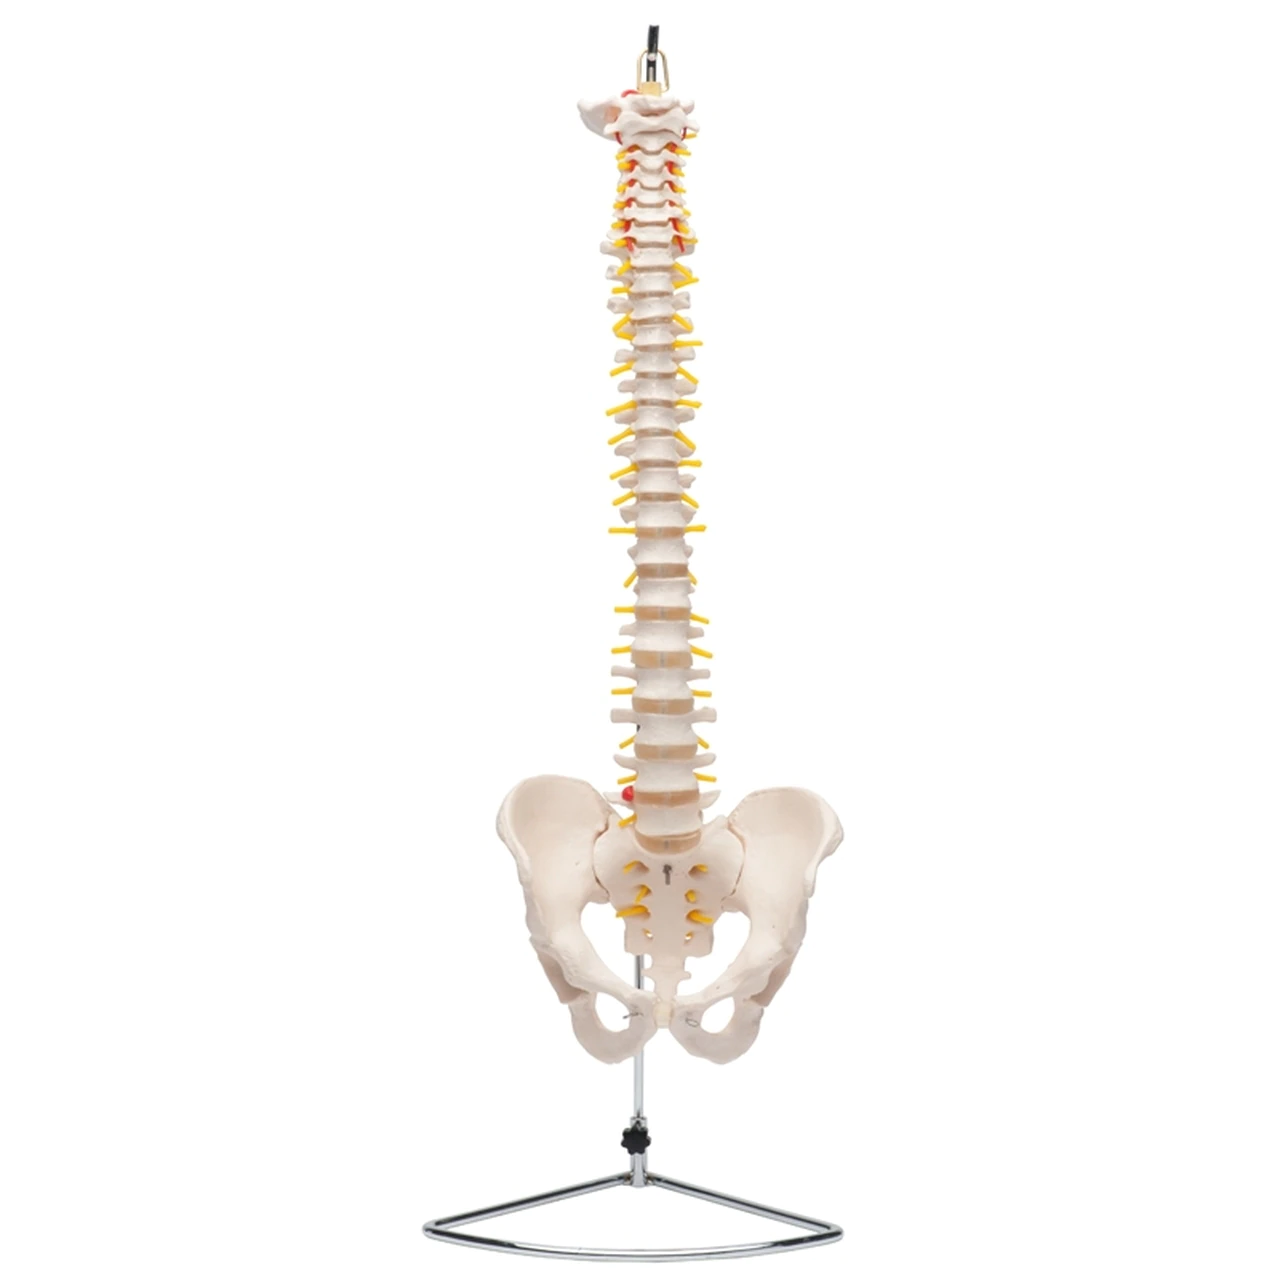 Standard Flexible Spine with Stand - physio supplies canada